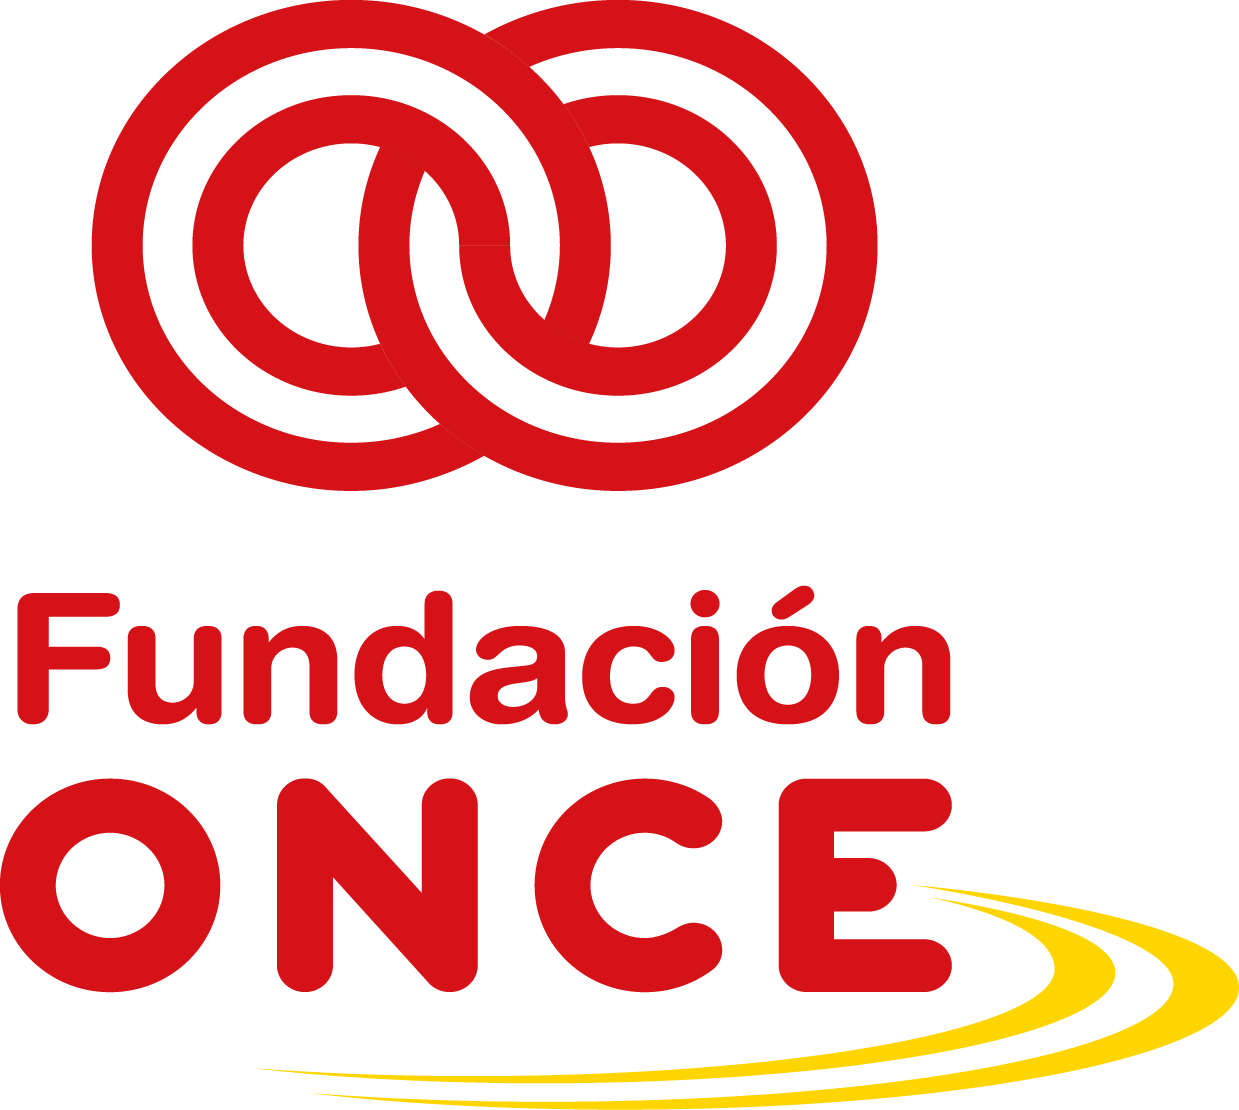 Visit the ONCE Foundation website. This link will open a new window